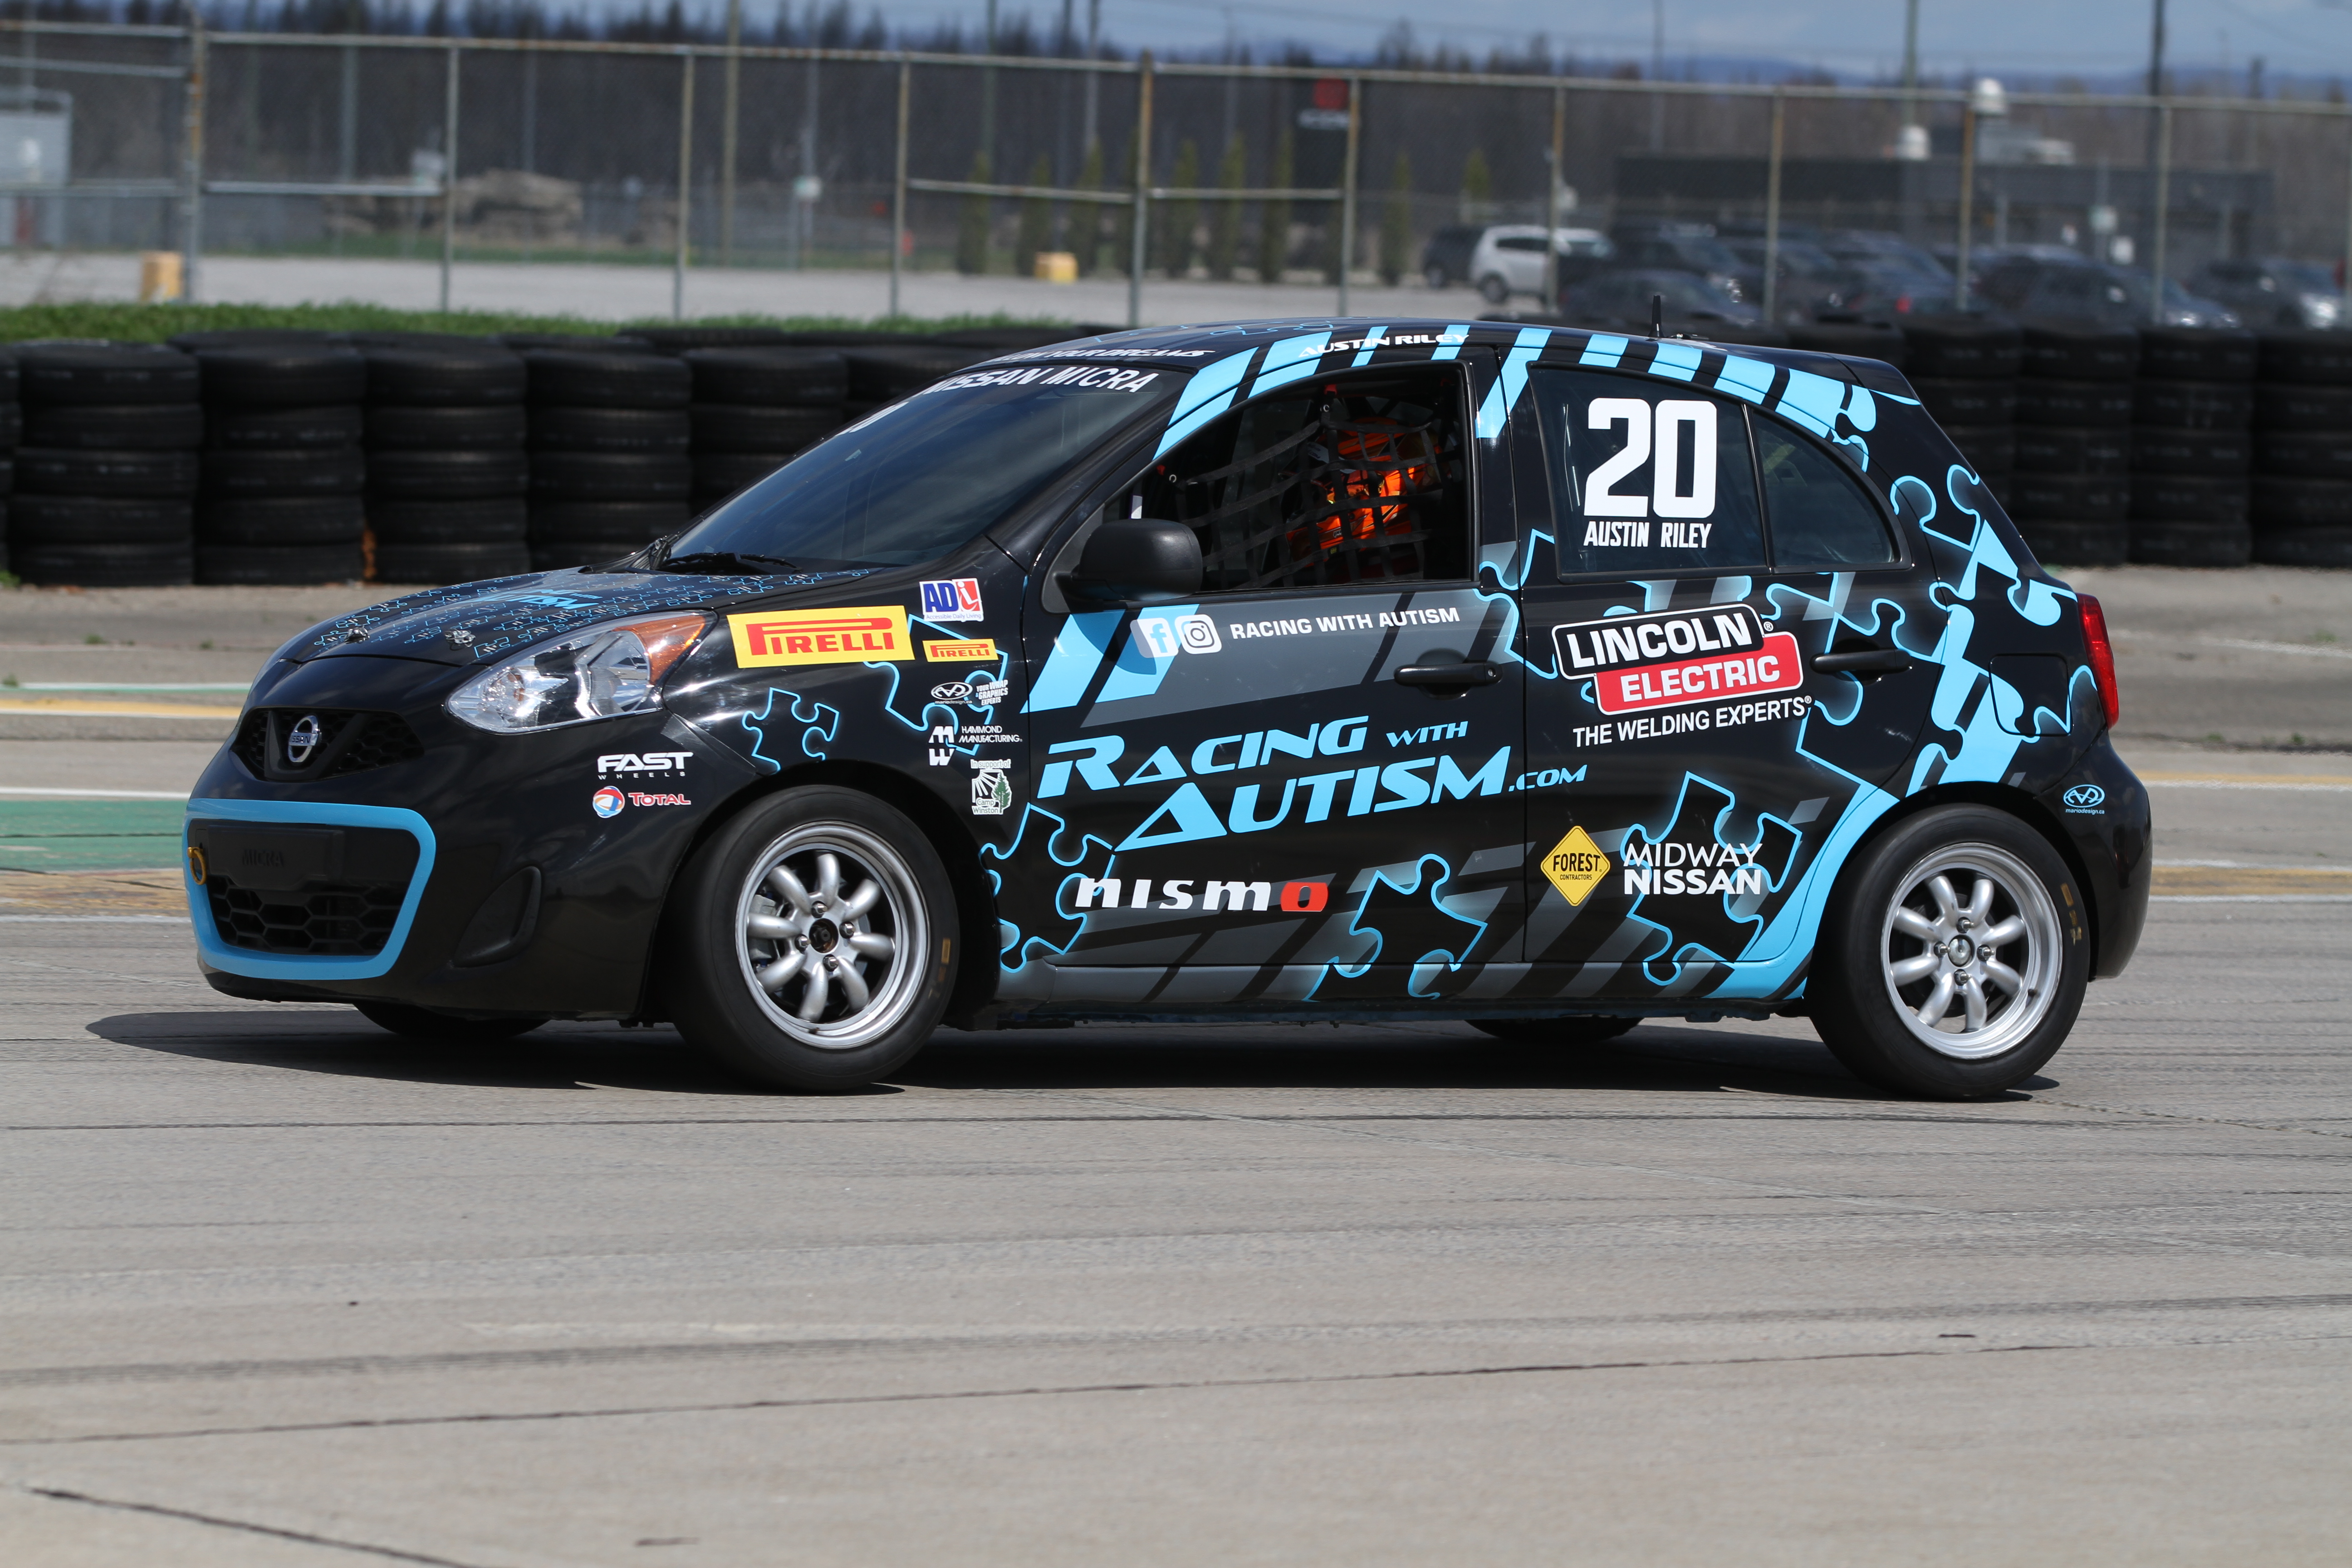 Micra and motorsport: What is the new Nissan hatchback's surprising link to  world-class racing?